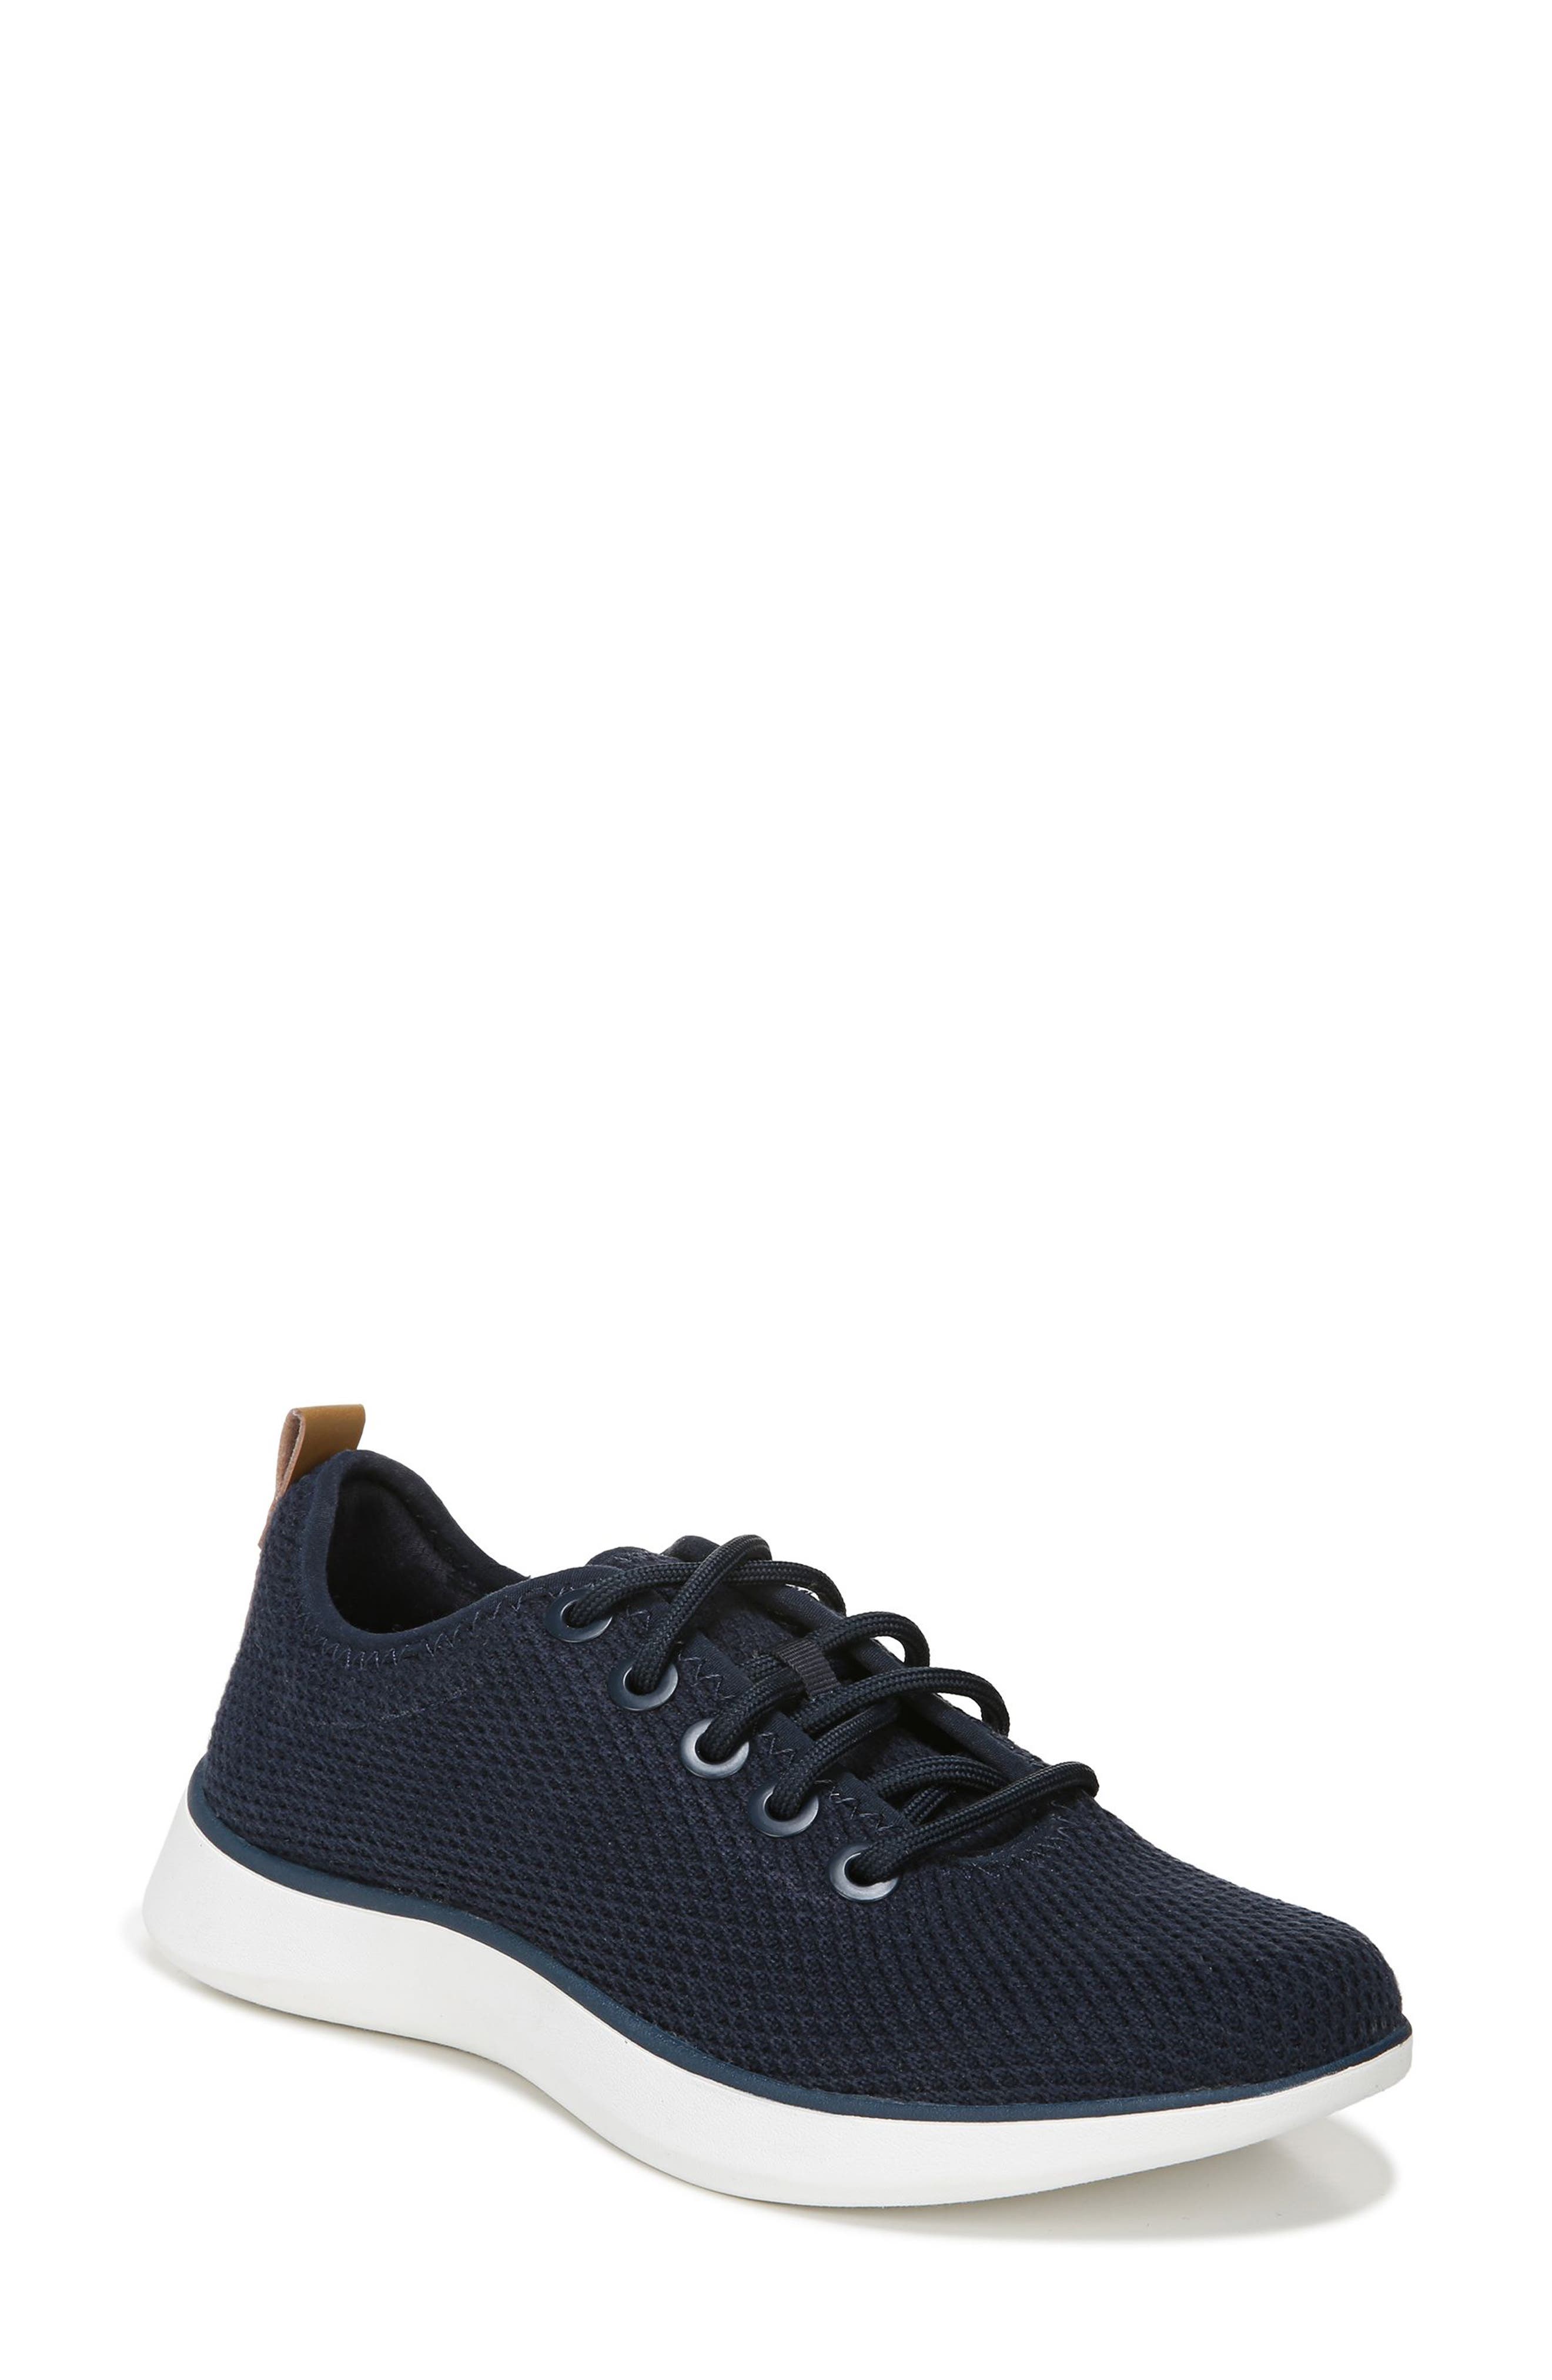 Dr. Scholl's Freestep Sneaker in Navy Fabric